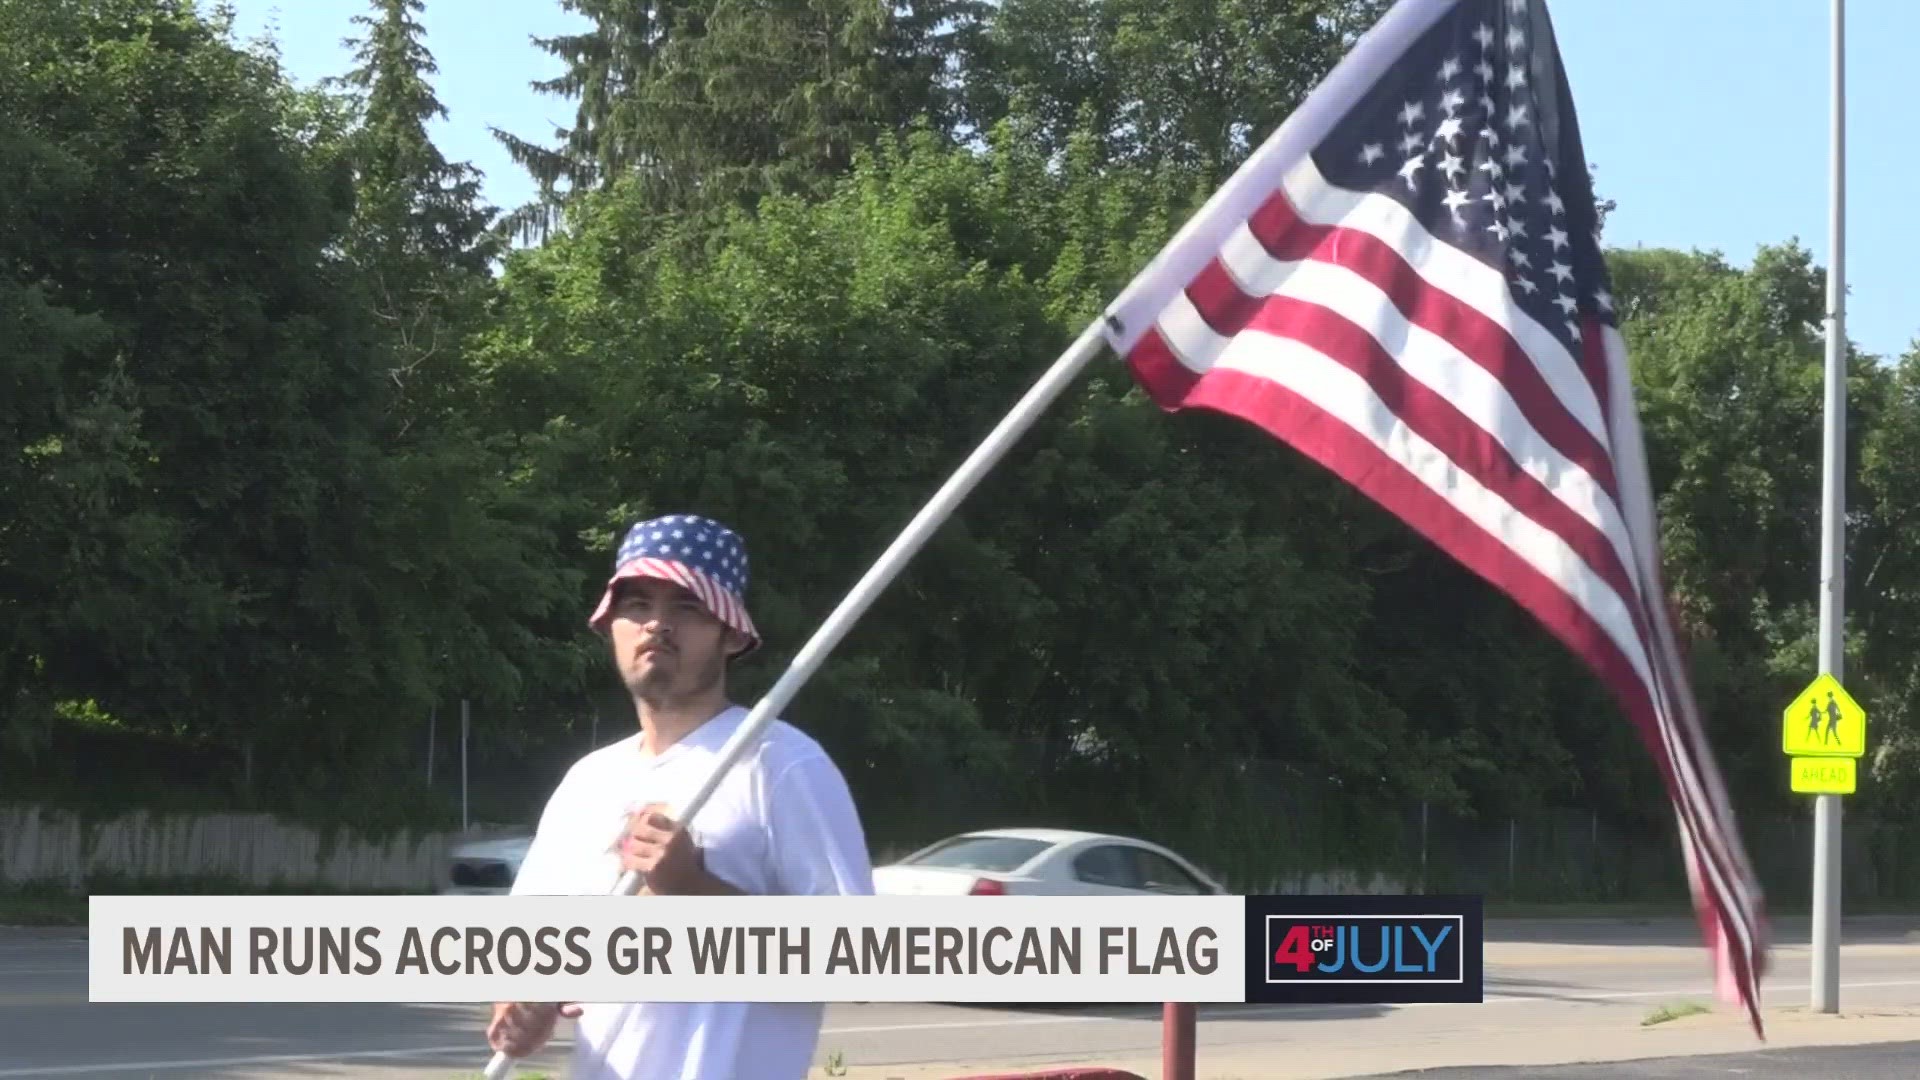 A West Michigan man carried an American flag through Grand Rapids this July 4th to celebrate the holiday one mile at a time.